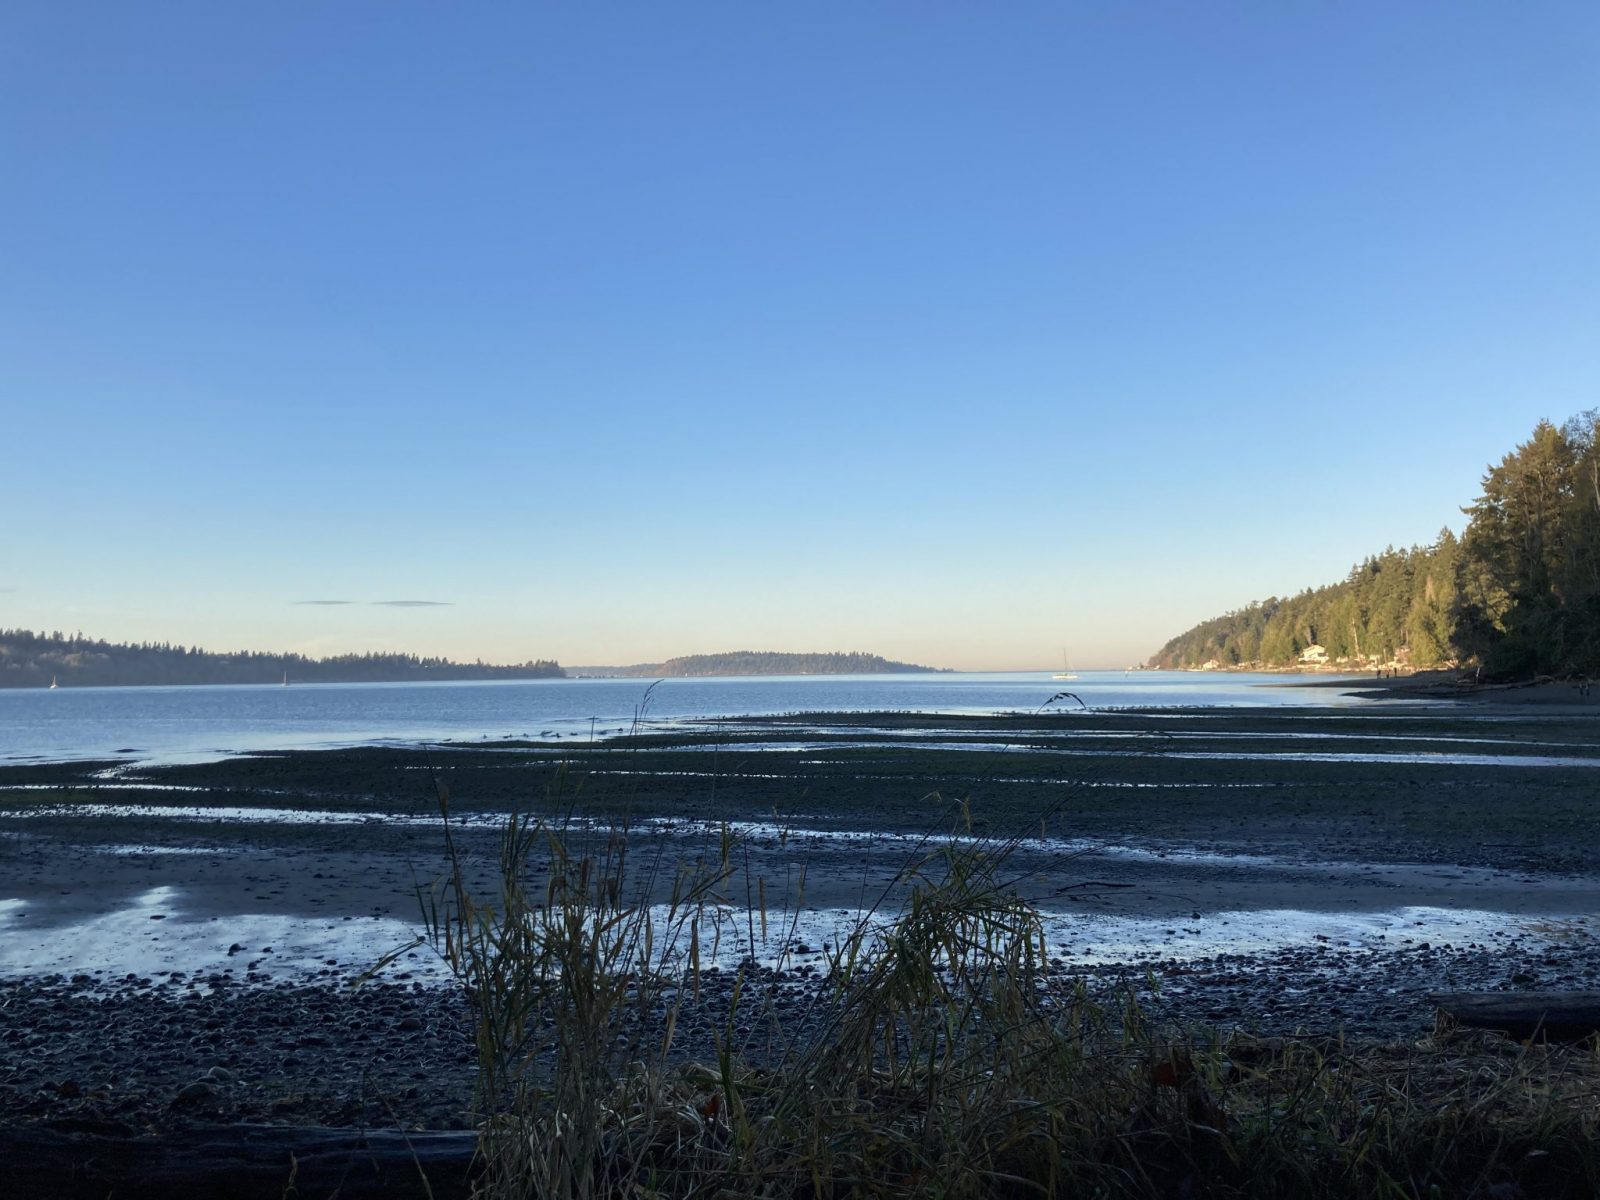 Fern Cove in the Shinglemill Creek Preserve on Vashon Island. The tide is out and the beach is wide with a stream entering the cove. There are distant islands and nearer by forest. It's a sunny day just before sunset